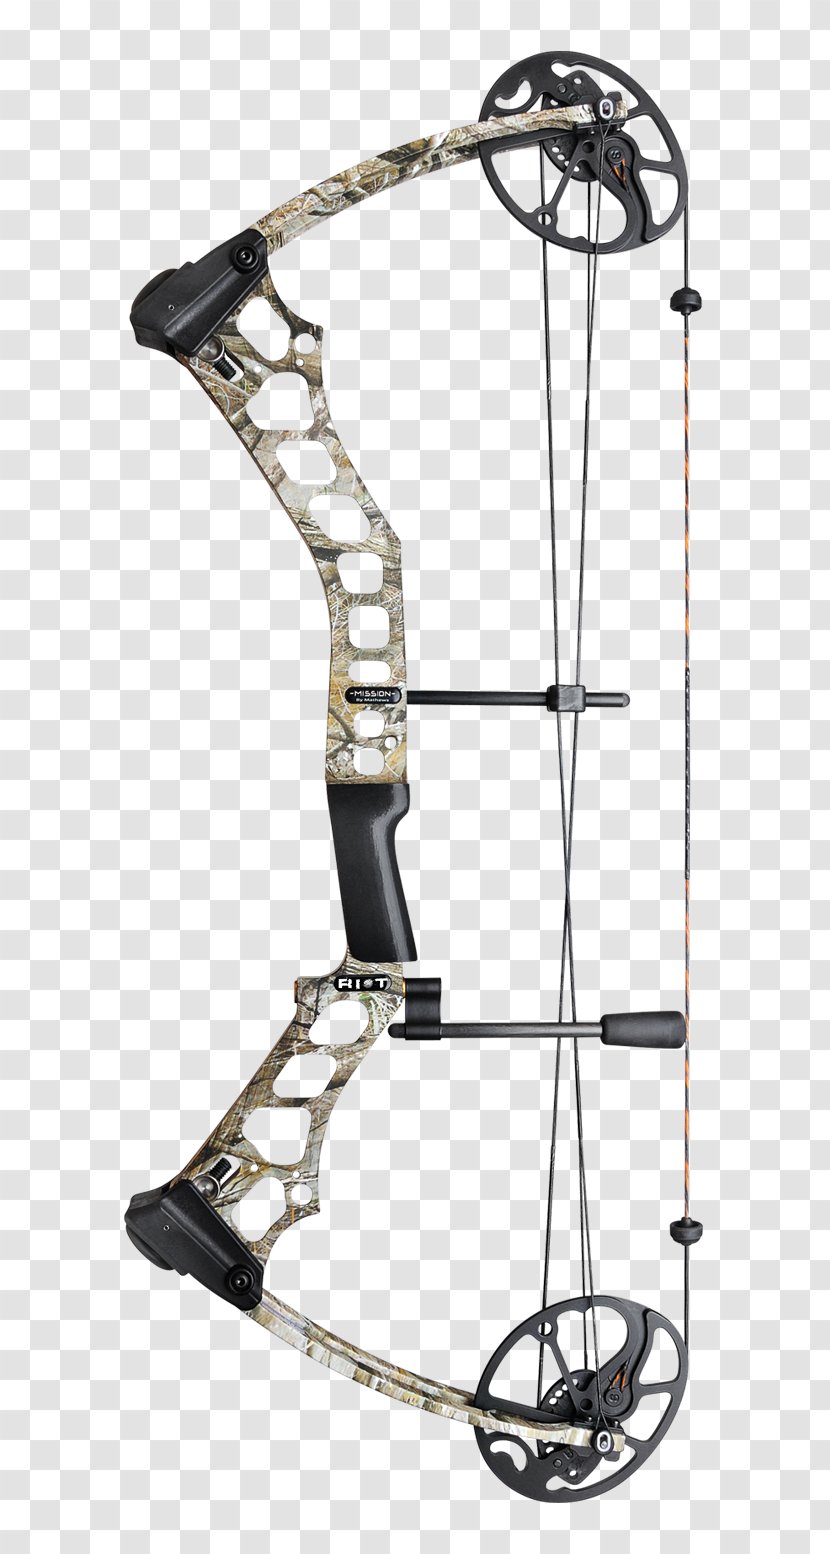 Compound Bows Bow And Arrow Archery Bowhunting - Borkholder Transparent PNG